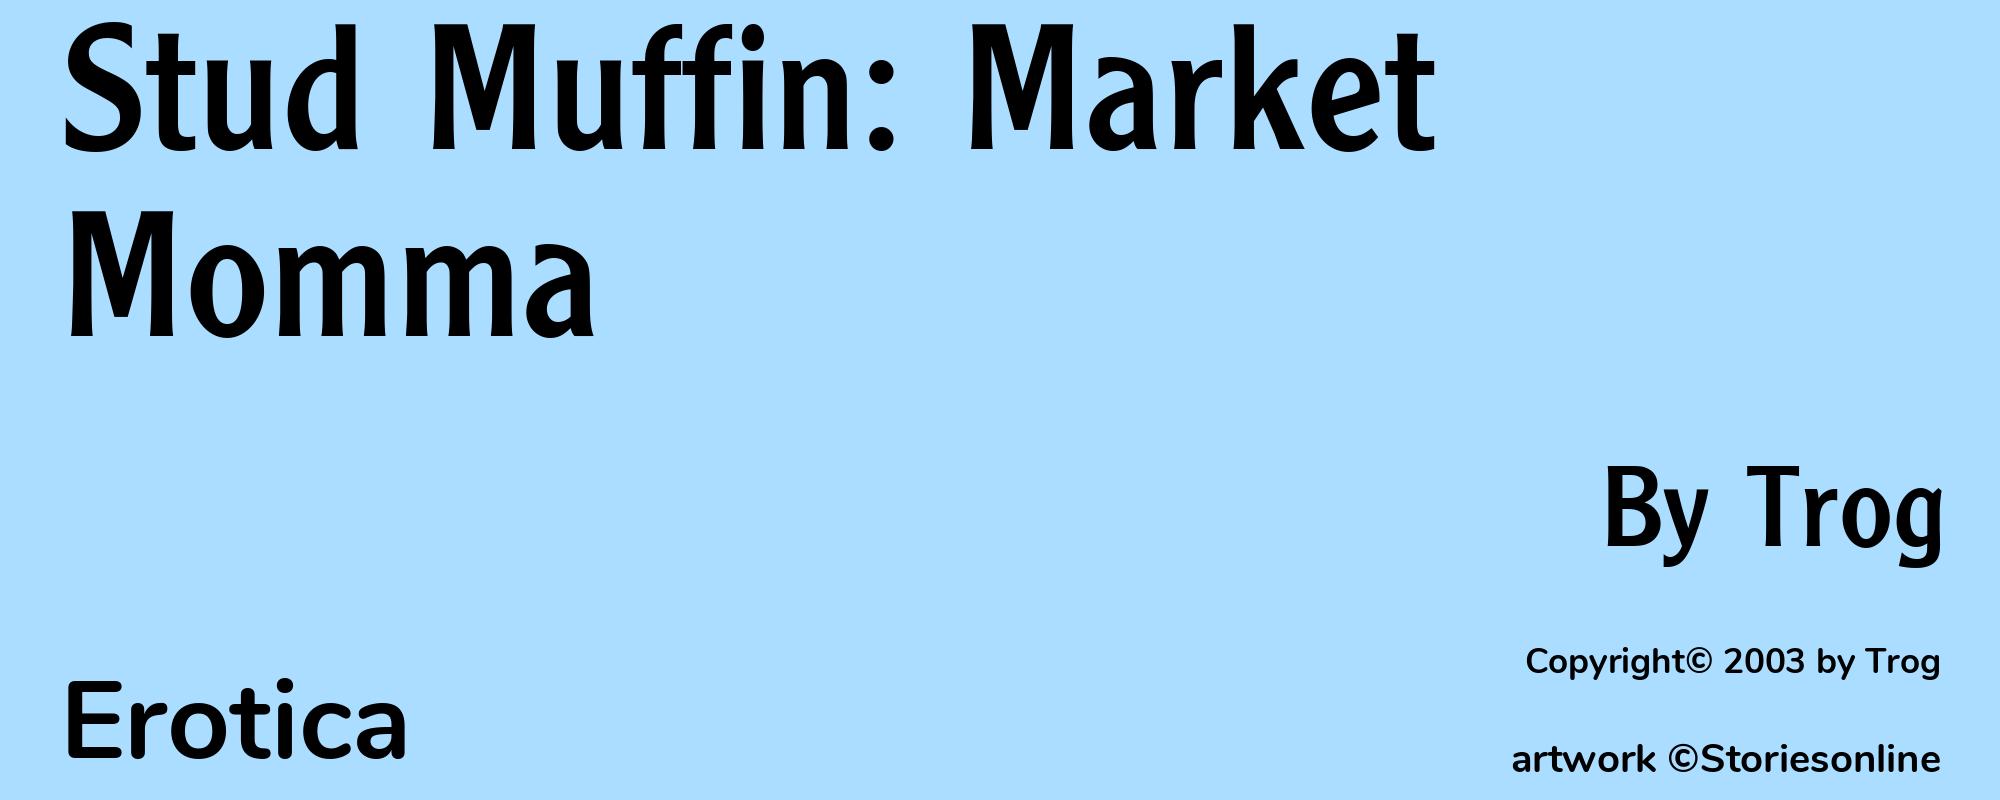 Stud Muffin: Market Momma - Cover